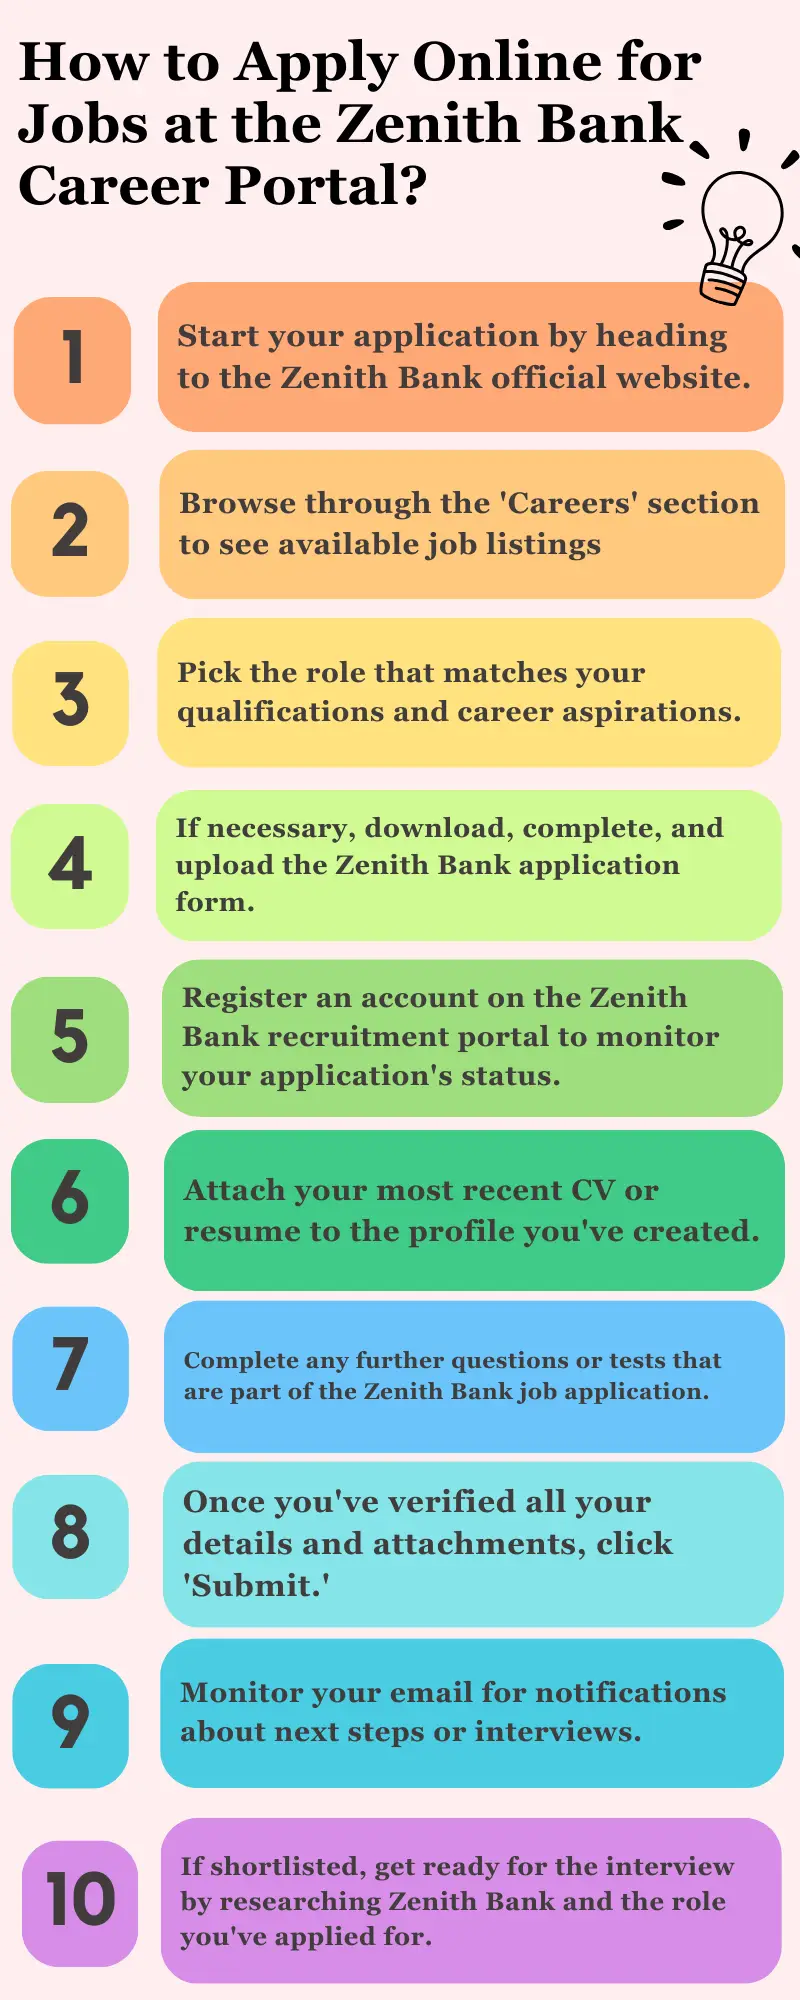 How to Apply Online for Jobs at the Zenith Bank Career Portal?